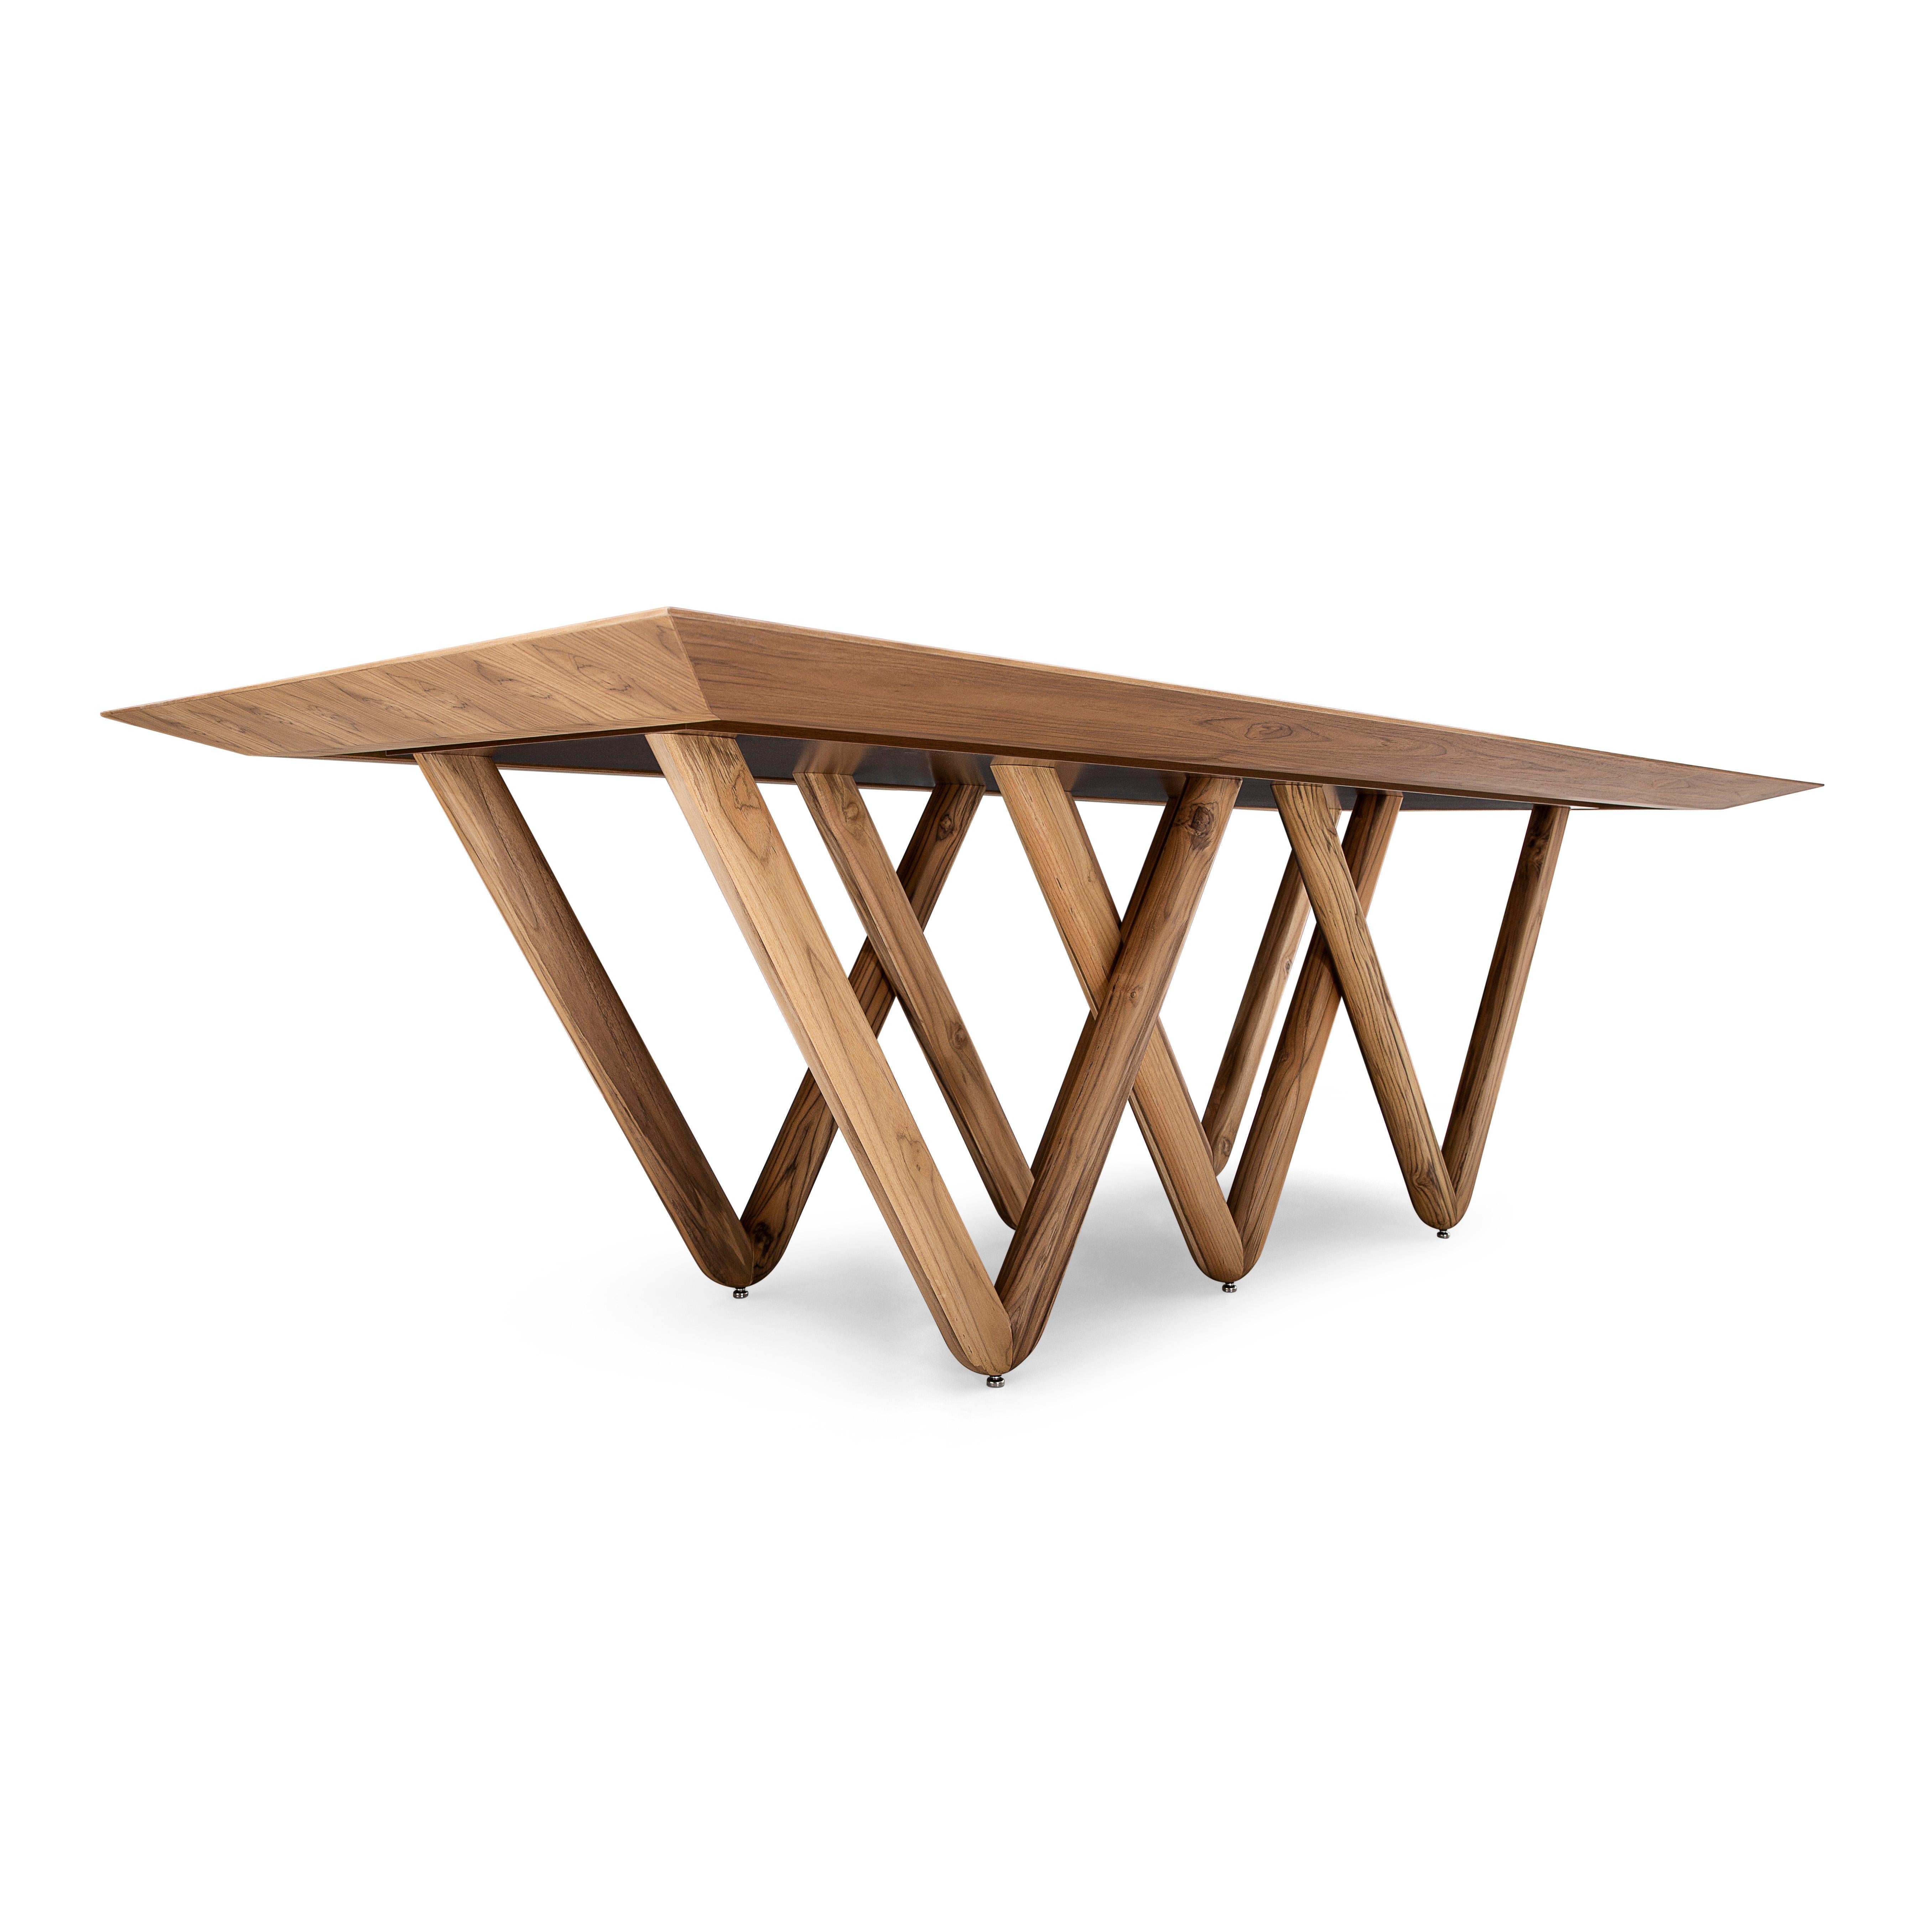 Contemporary Dablio Dining Table with a Teak Wood Finish Veneered Table 98'' For Sale